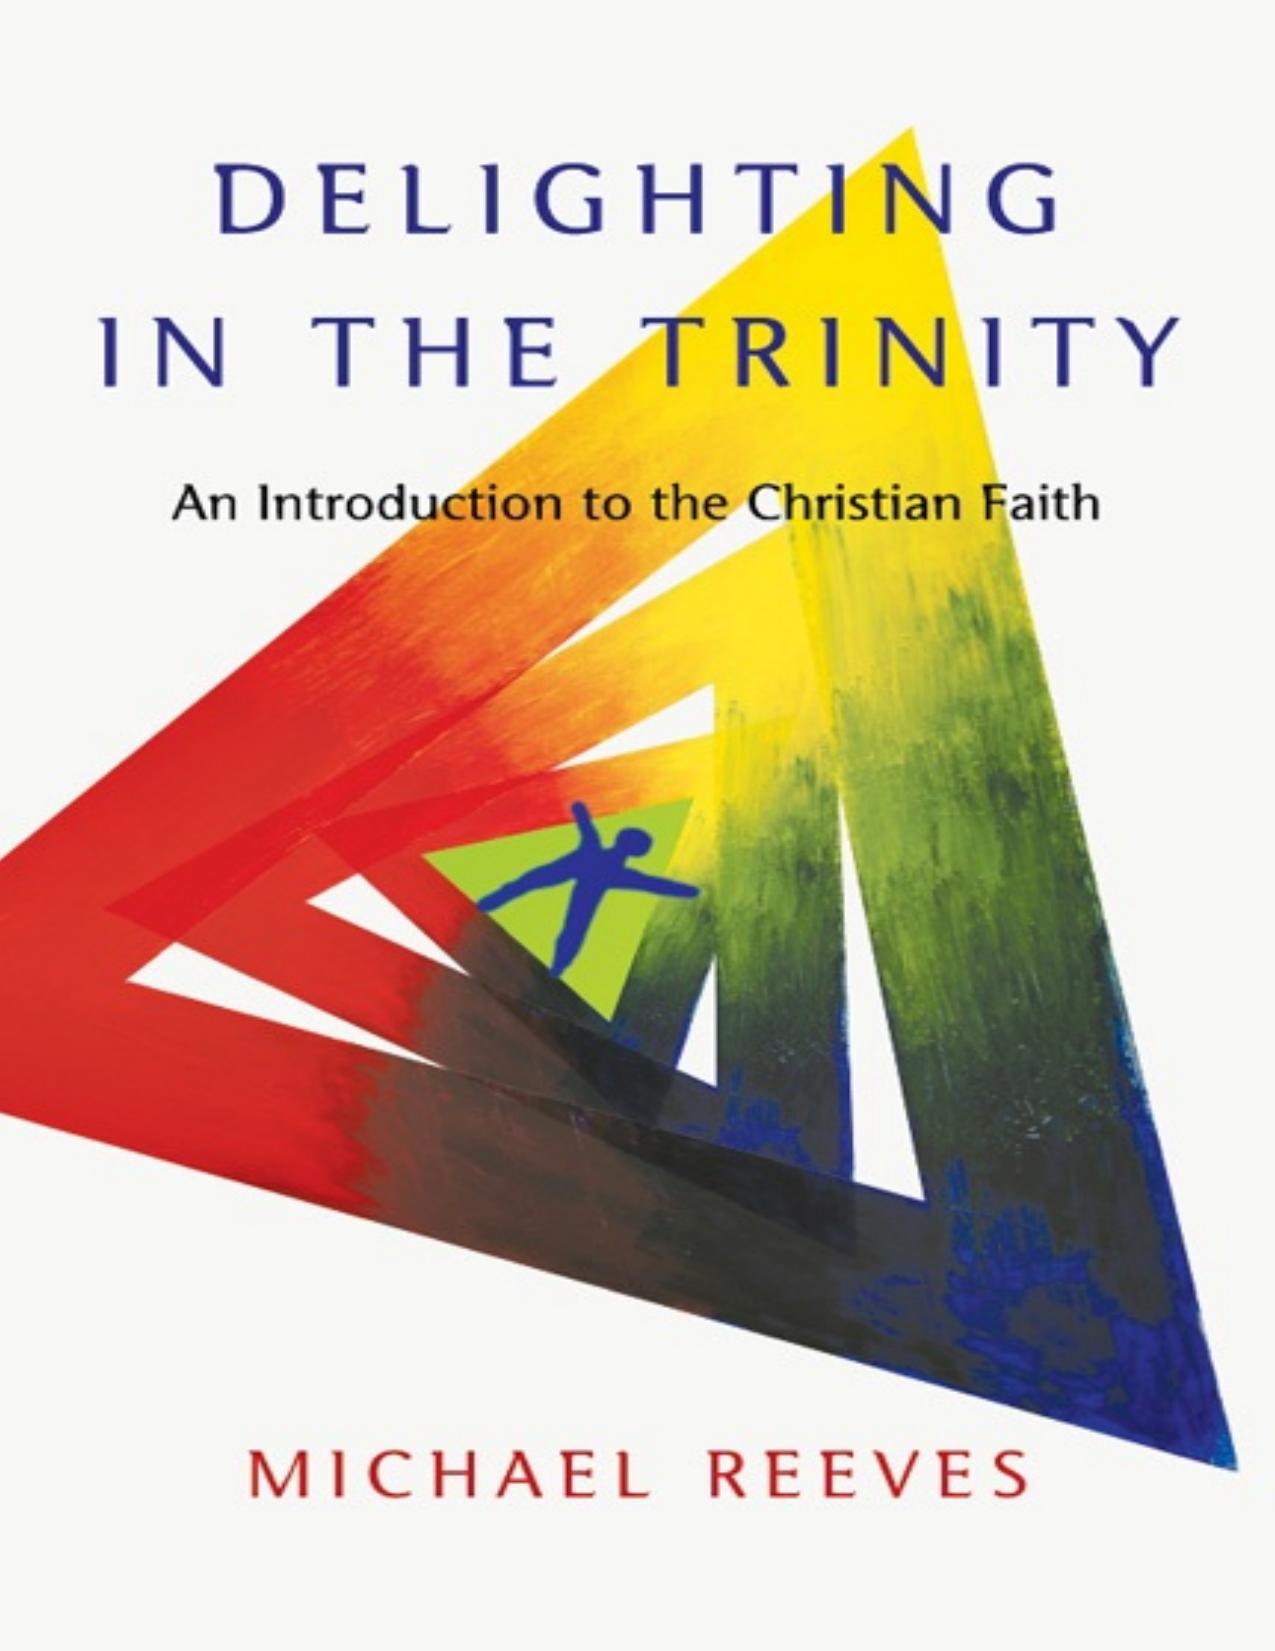 Delighting in the Trinity: An Introduction to the Christian Faith - PDFDrive.com